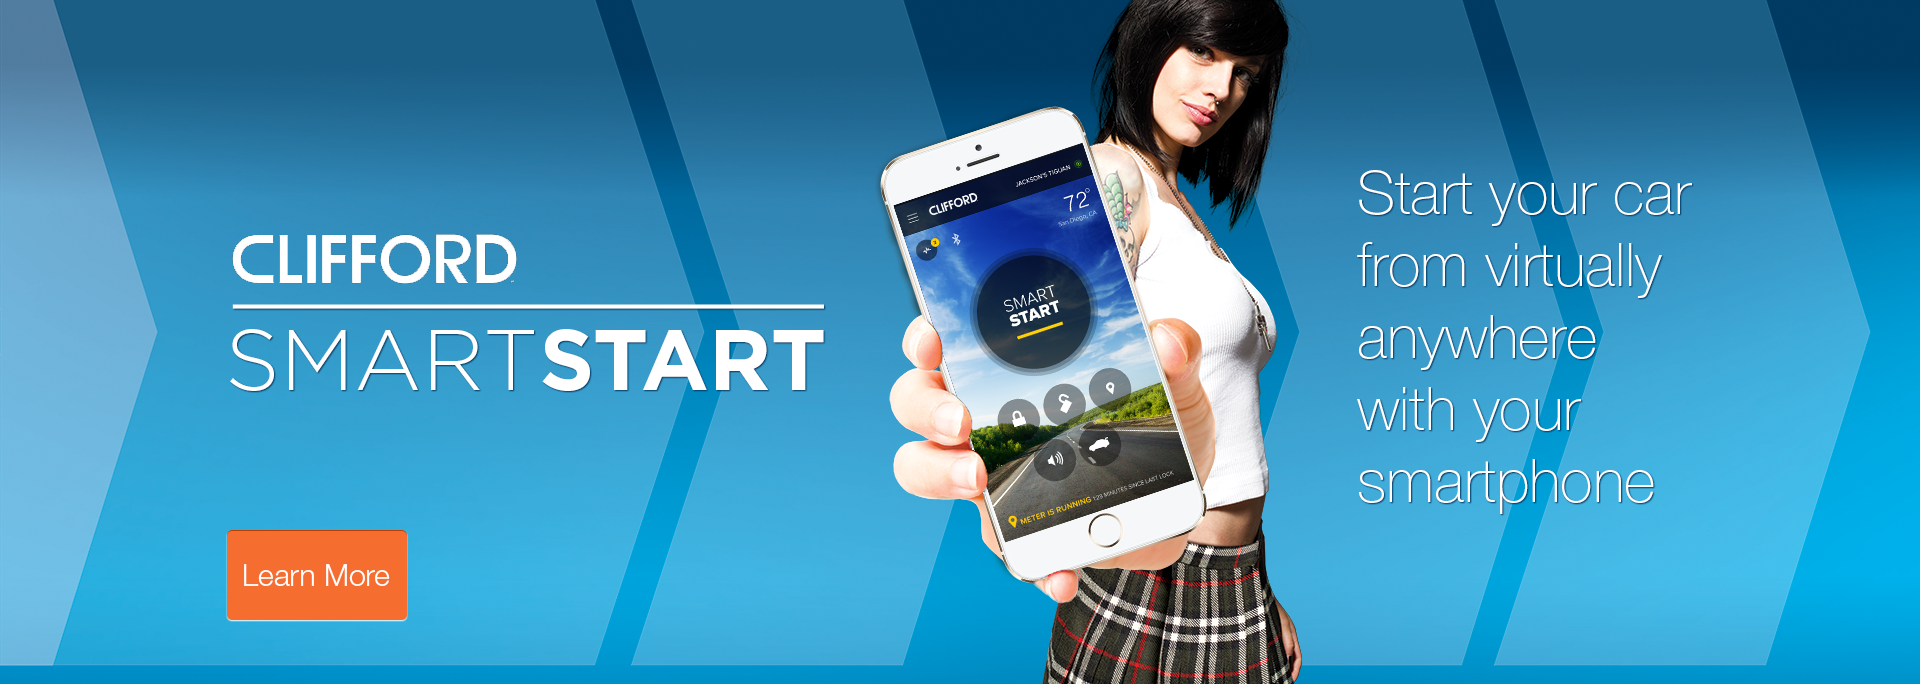 DIRECTED SMARTSTART Start your car from virtually anywhere with your smartphone.